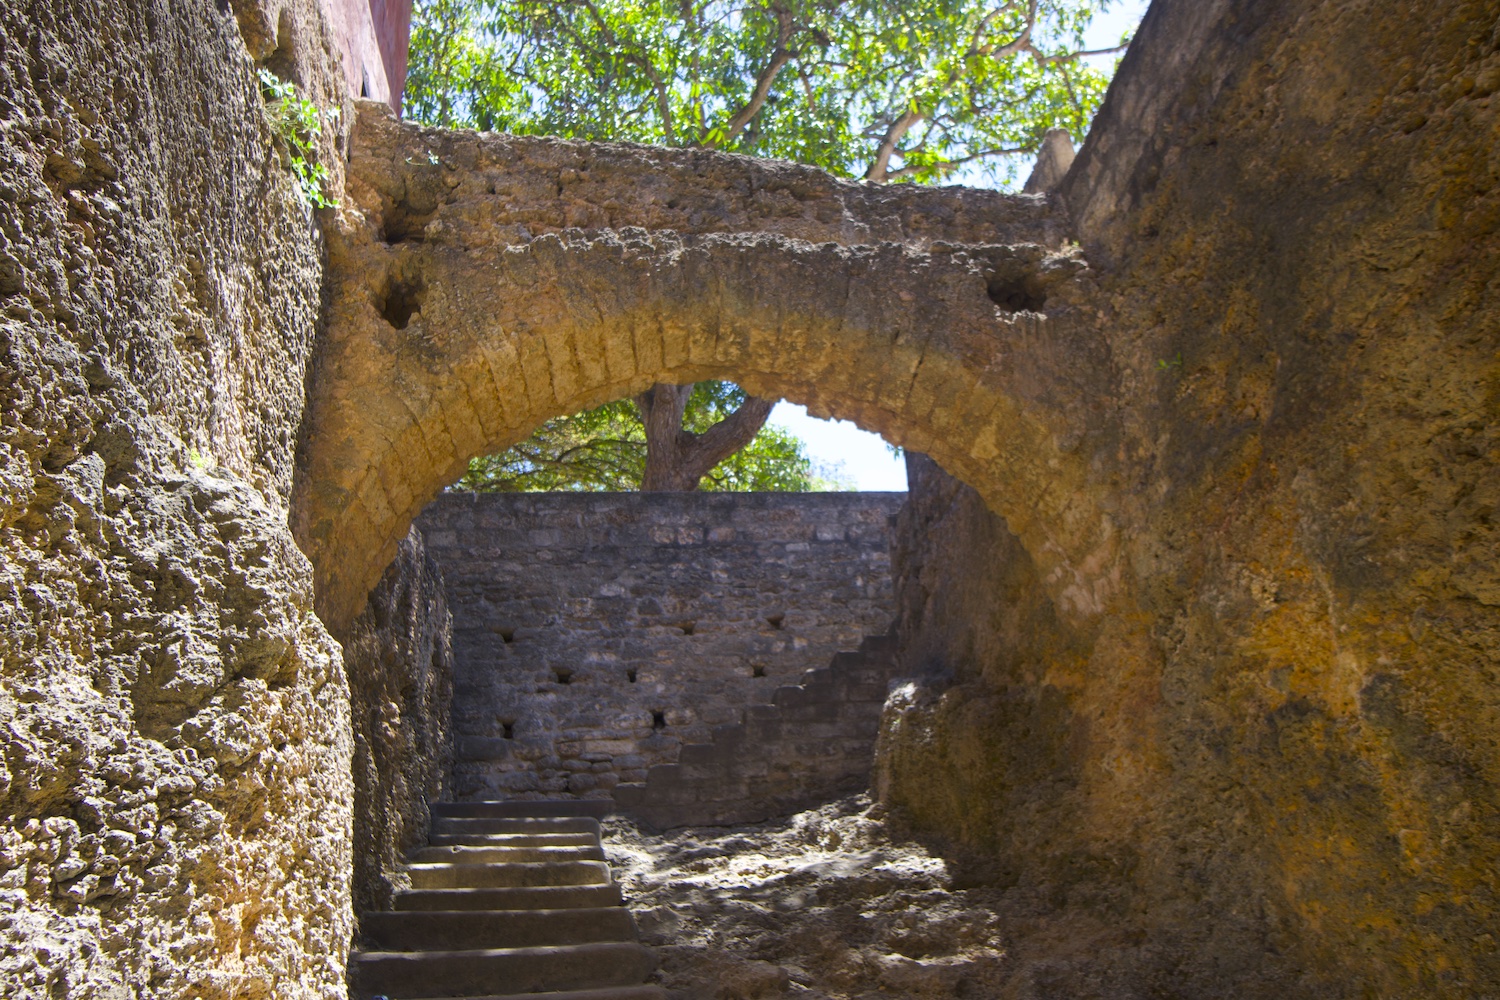 Coral rock bridge and structures in Fort Jesus, in Mombasa